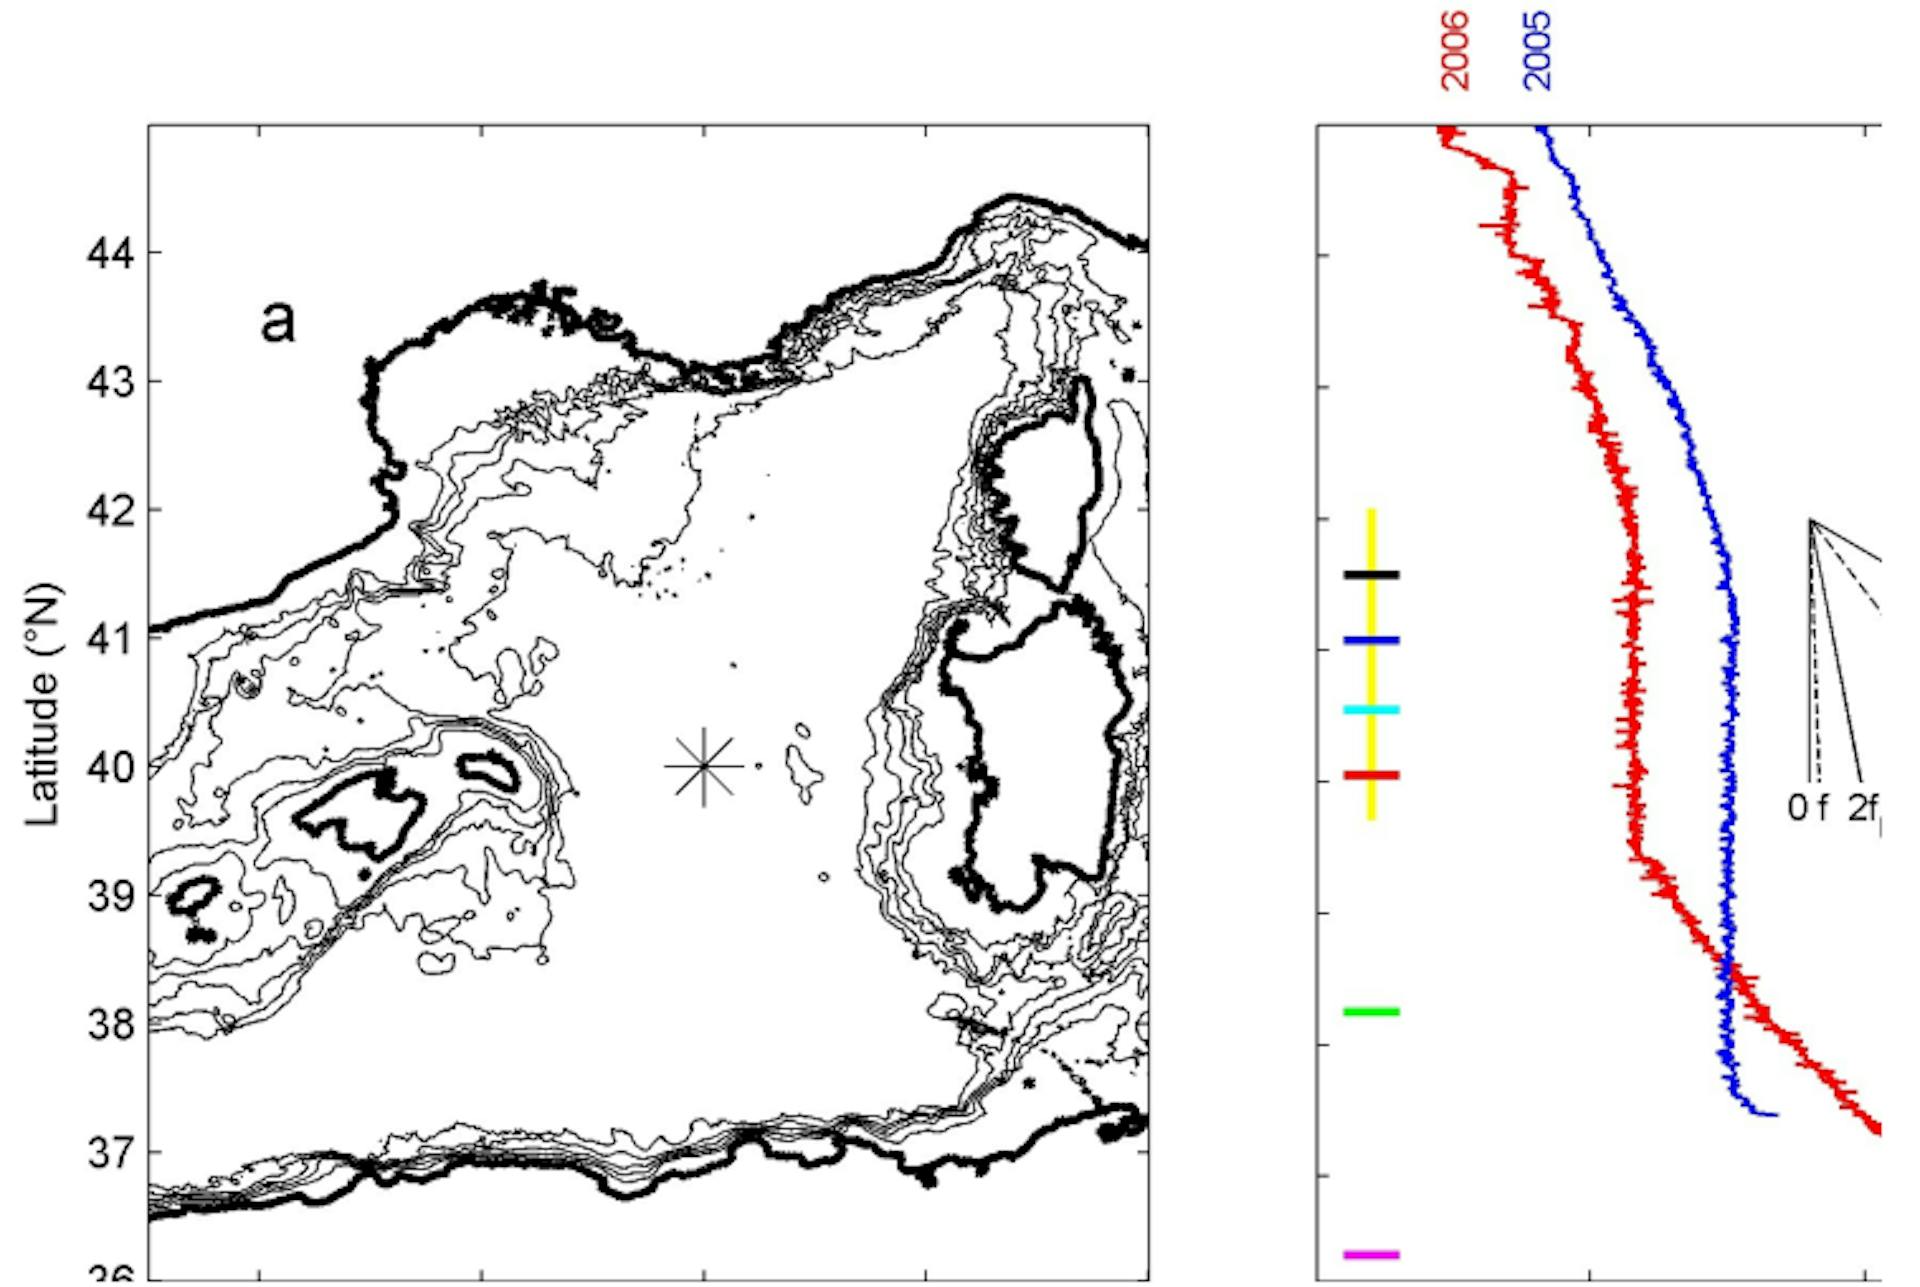 Fig. 1 Site and hydrography. a) Western-Mediteranean Sea with observational site *. Depth contours every 500 m for [500, 2500] m and 2750 m. b) Typical local density anomaly profiles referenced to a pressure of 2000 dbar observed using shipborne CTD in April 2005 (blue; stopped at z = -2500 m) and February 2006 (red) during mooring deployment and recovery cruises, respectively. For reference, particular density gradient slopes are given (see text). To the left, the mooring is given schematically, with current meter (CM) depths (same colours as in Figs 2a,b, 3a,b; light-blue: only Tdata) and range of upward looking ADCP (yellow). The local seafloor is at the x-axis.